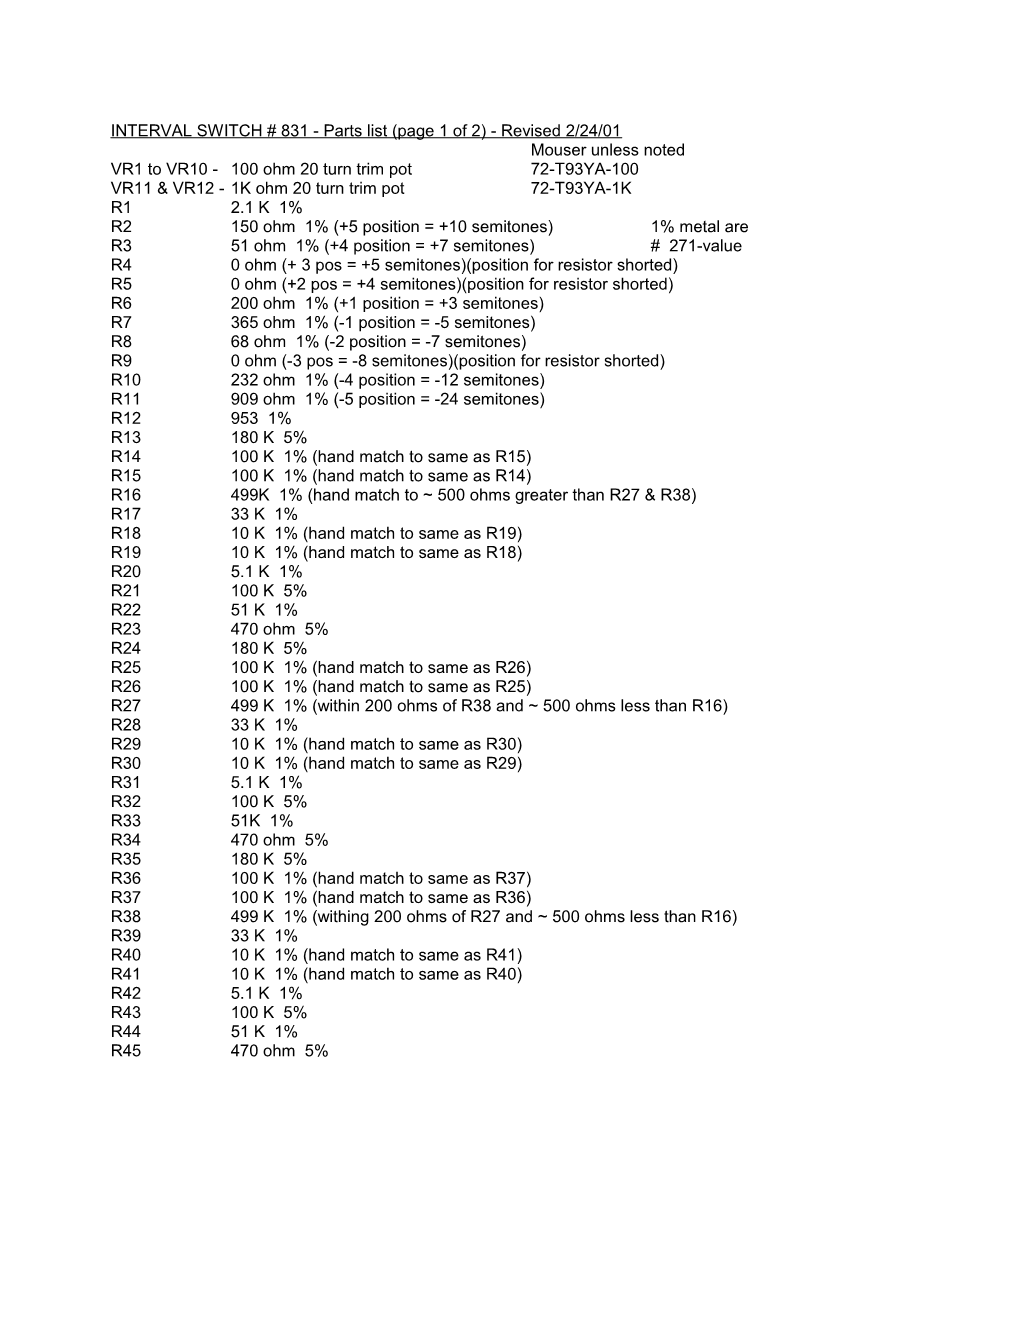 INTERVAL SWITCH # 831 - Parts List (Page 1 of 2) - Revised 1/25/01